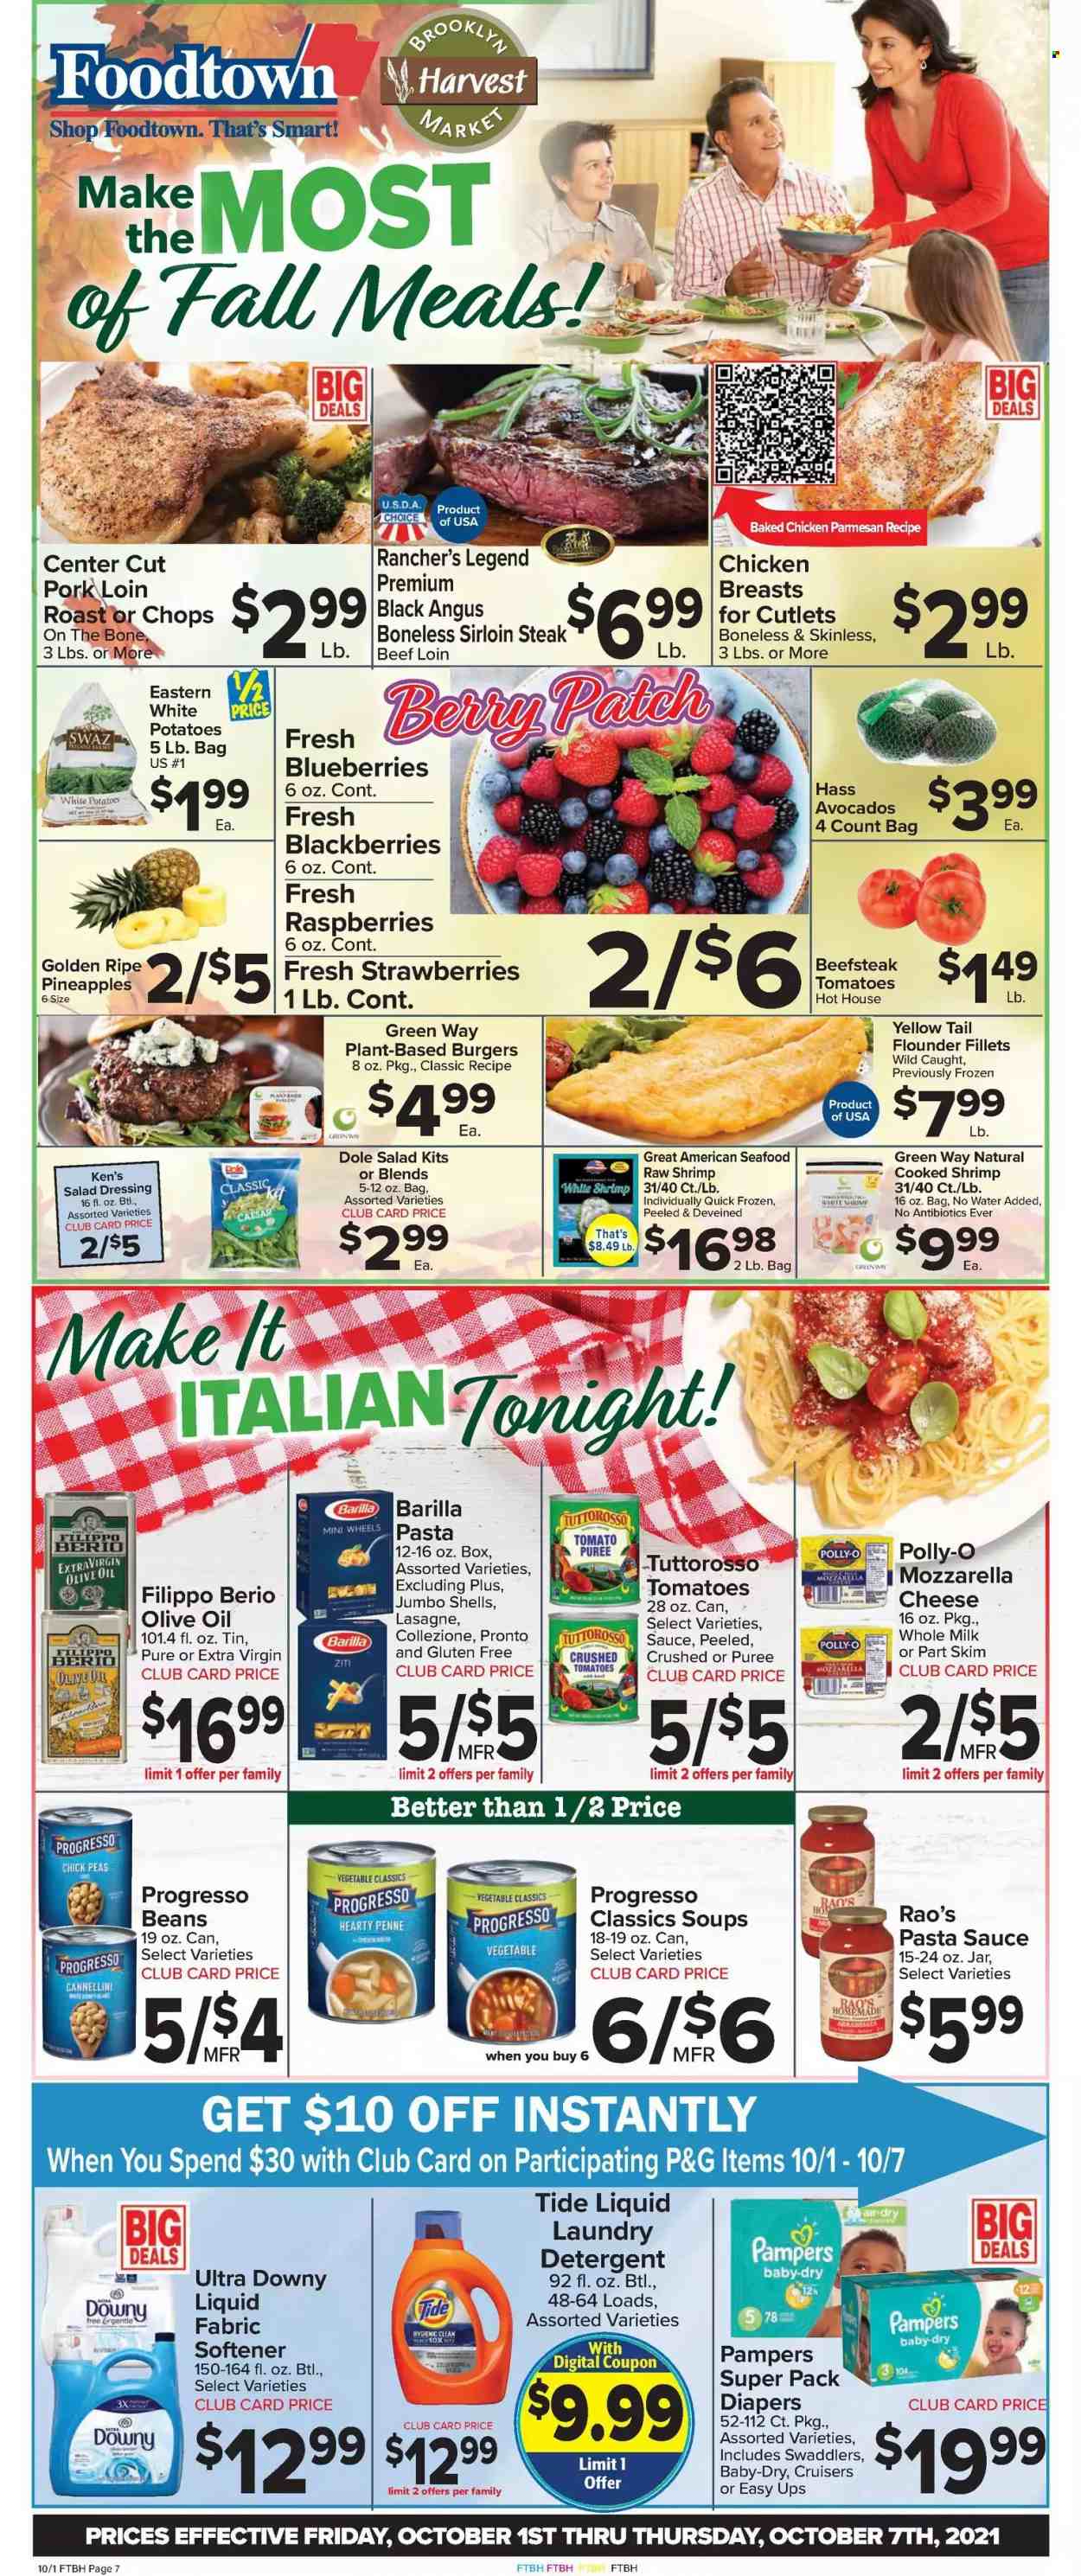 thumbnail - Foodtown Flyer - 10/01/2021 - 10/07/2021 - Sales products - beans, tomatoes, potatoes, Dole, avocado, blackberries, blueberries, strawberries, pineapple, flounder, seafood, shrimps, pasta sauce, hamburger, Barilla, Progresso, mozzarella, milk, crushed tomatoes, tomato sauce, tomato puree, penne, salad dressing, dressing, extra virgin olive oil, olive oil, oil, beer, beef sirloin, steak, sirloin steak, pork loin, pork meat, Pampers, nappies, detergent, Tide, fabric softener, Downy Laundry. Page 1.